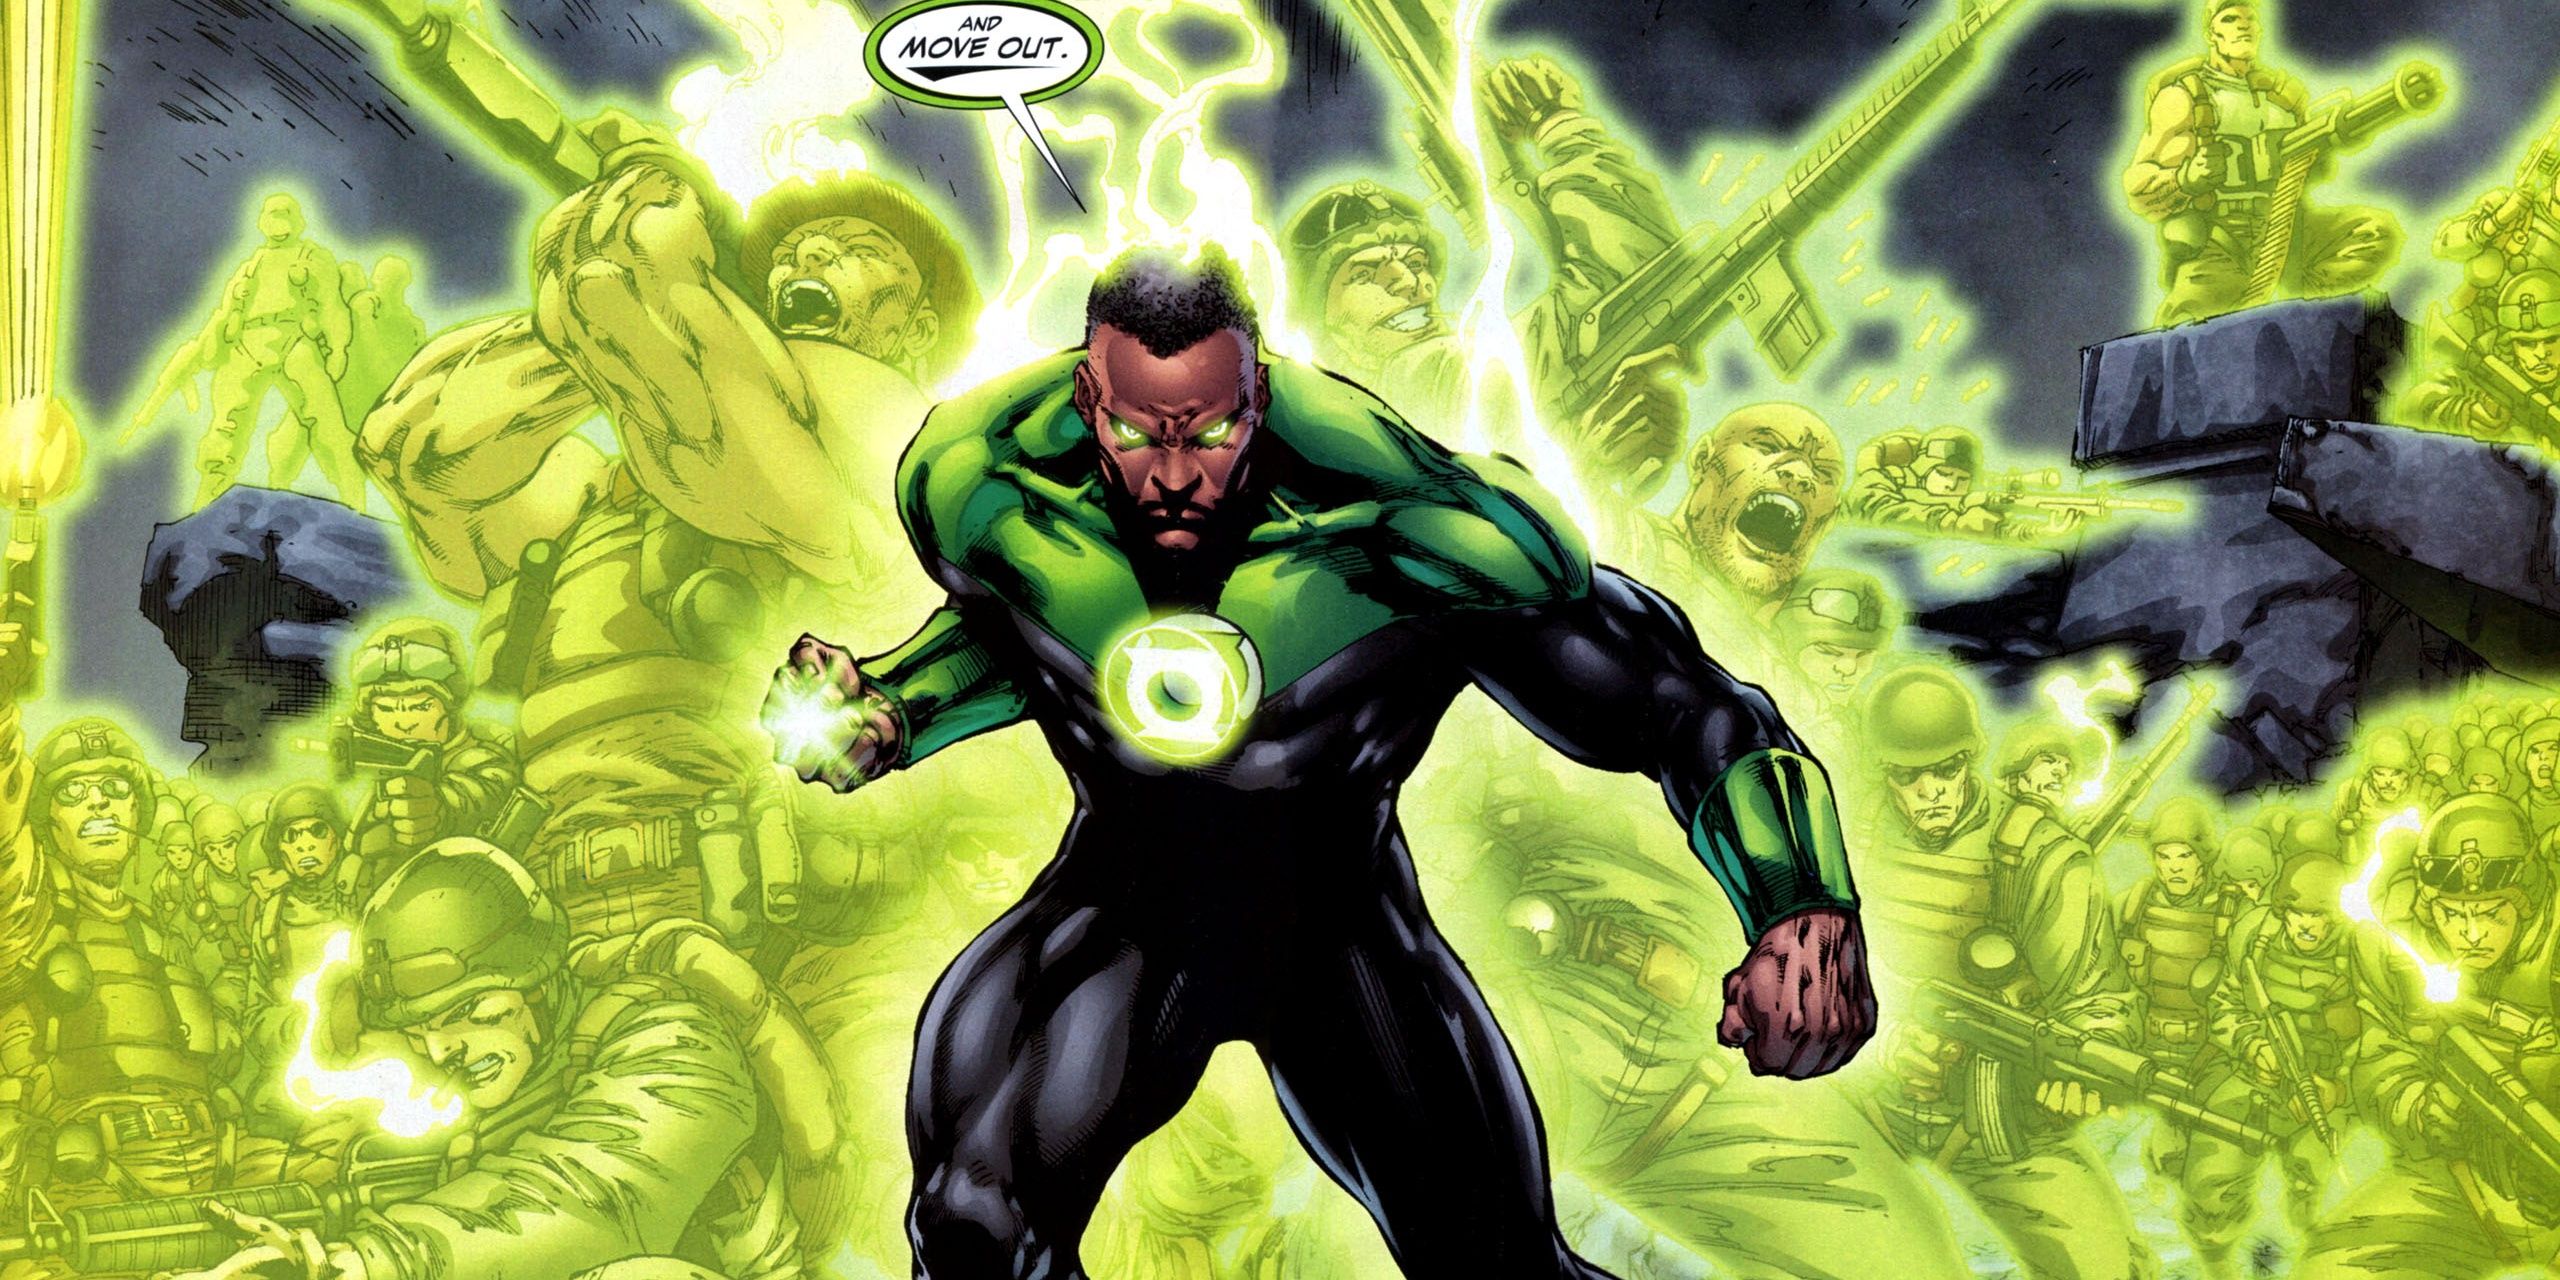 Joh Stewart creating an army with his Green Lantern ring